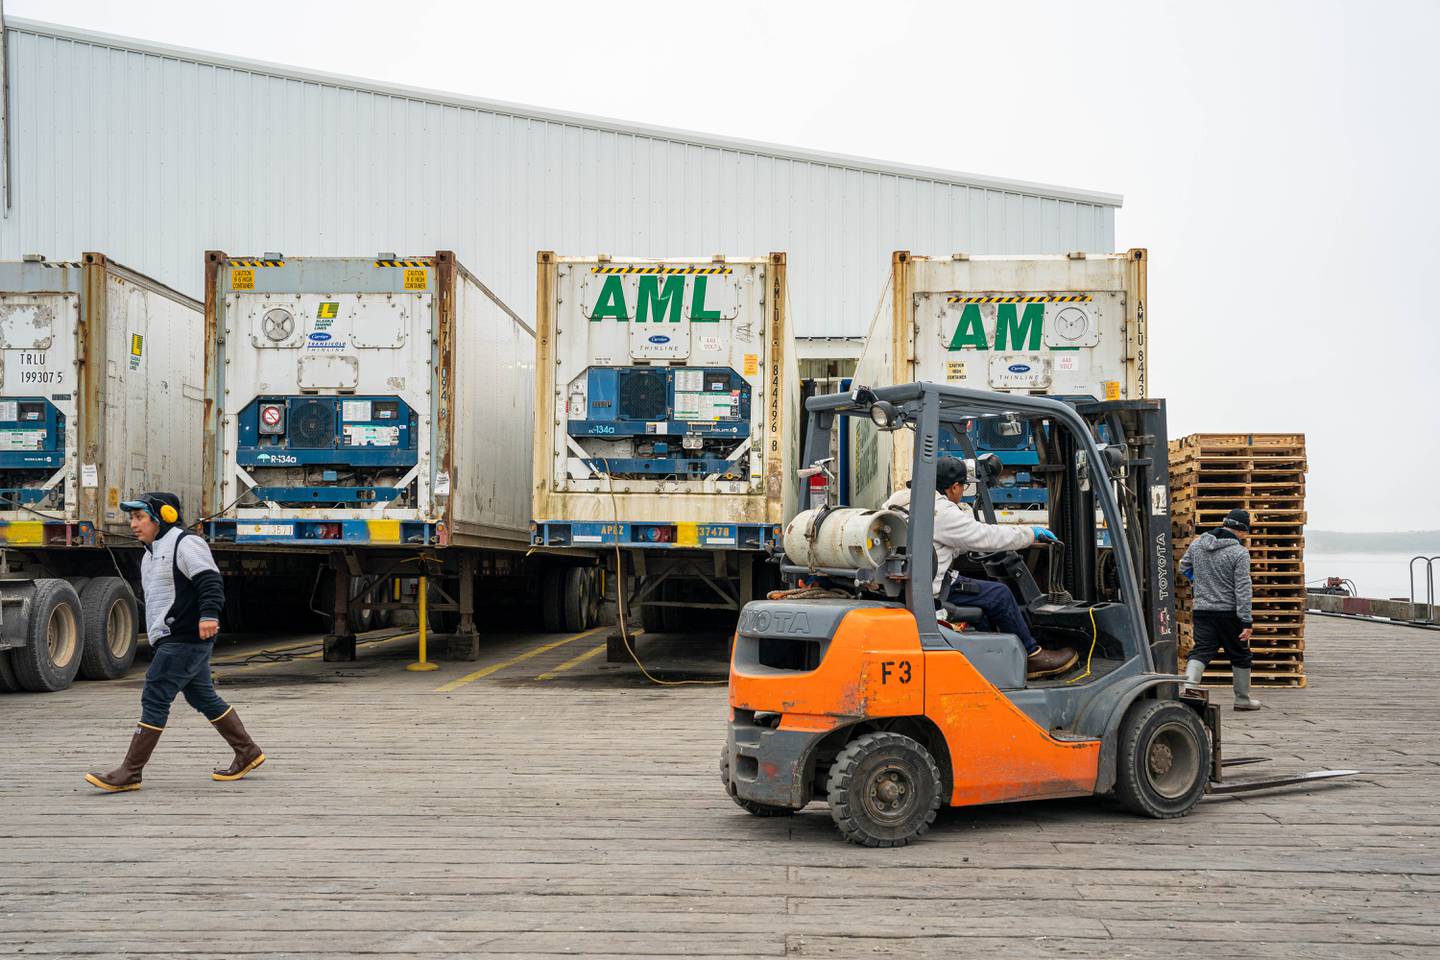 AML, Alaska Marine Lines, Bristol Bay, Lynden, Naknek, cannery, commercial fishing, container, fish processing, fishing, freezer container, salmon